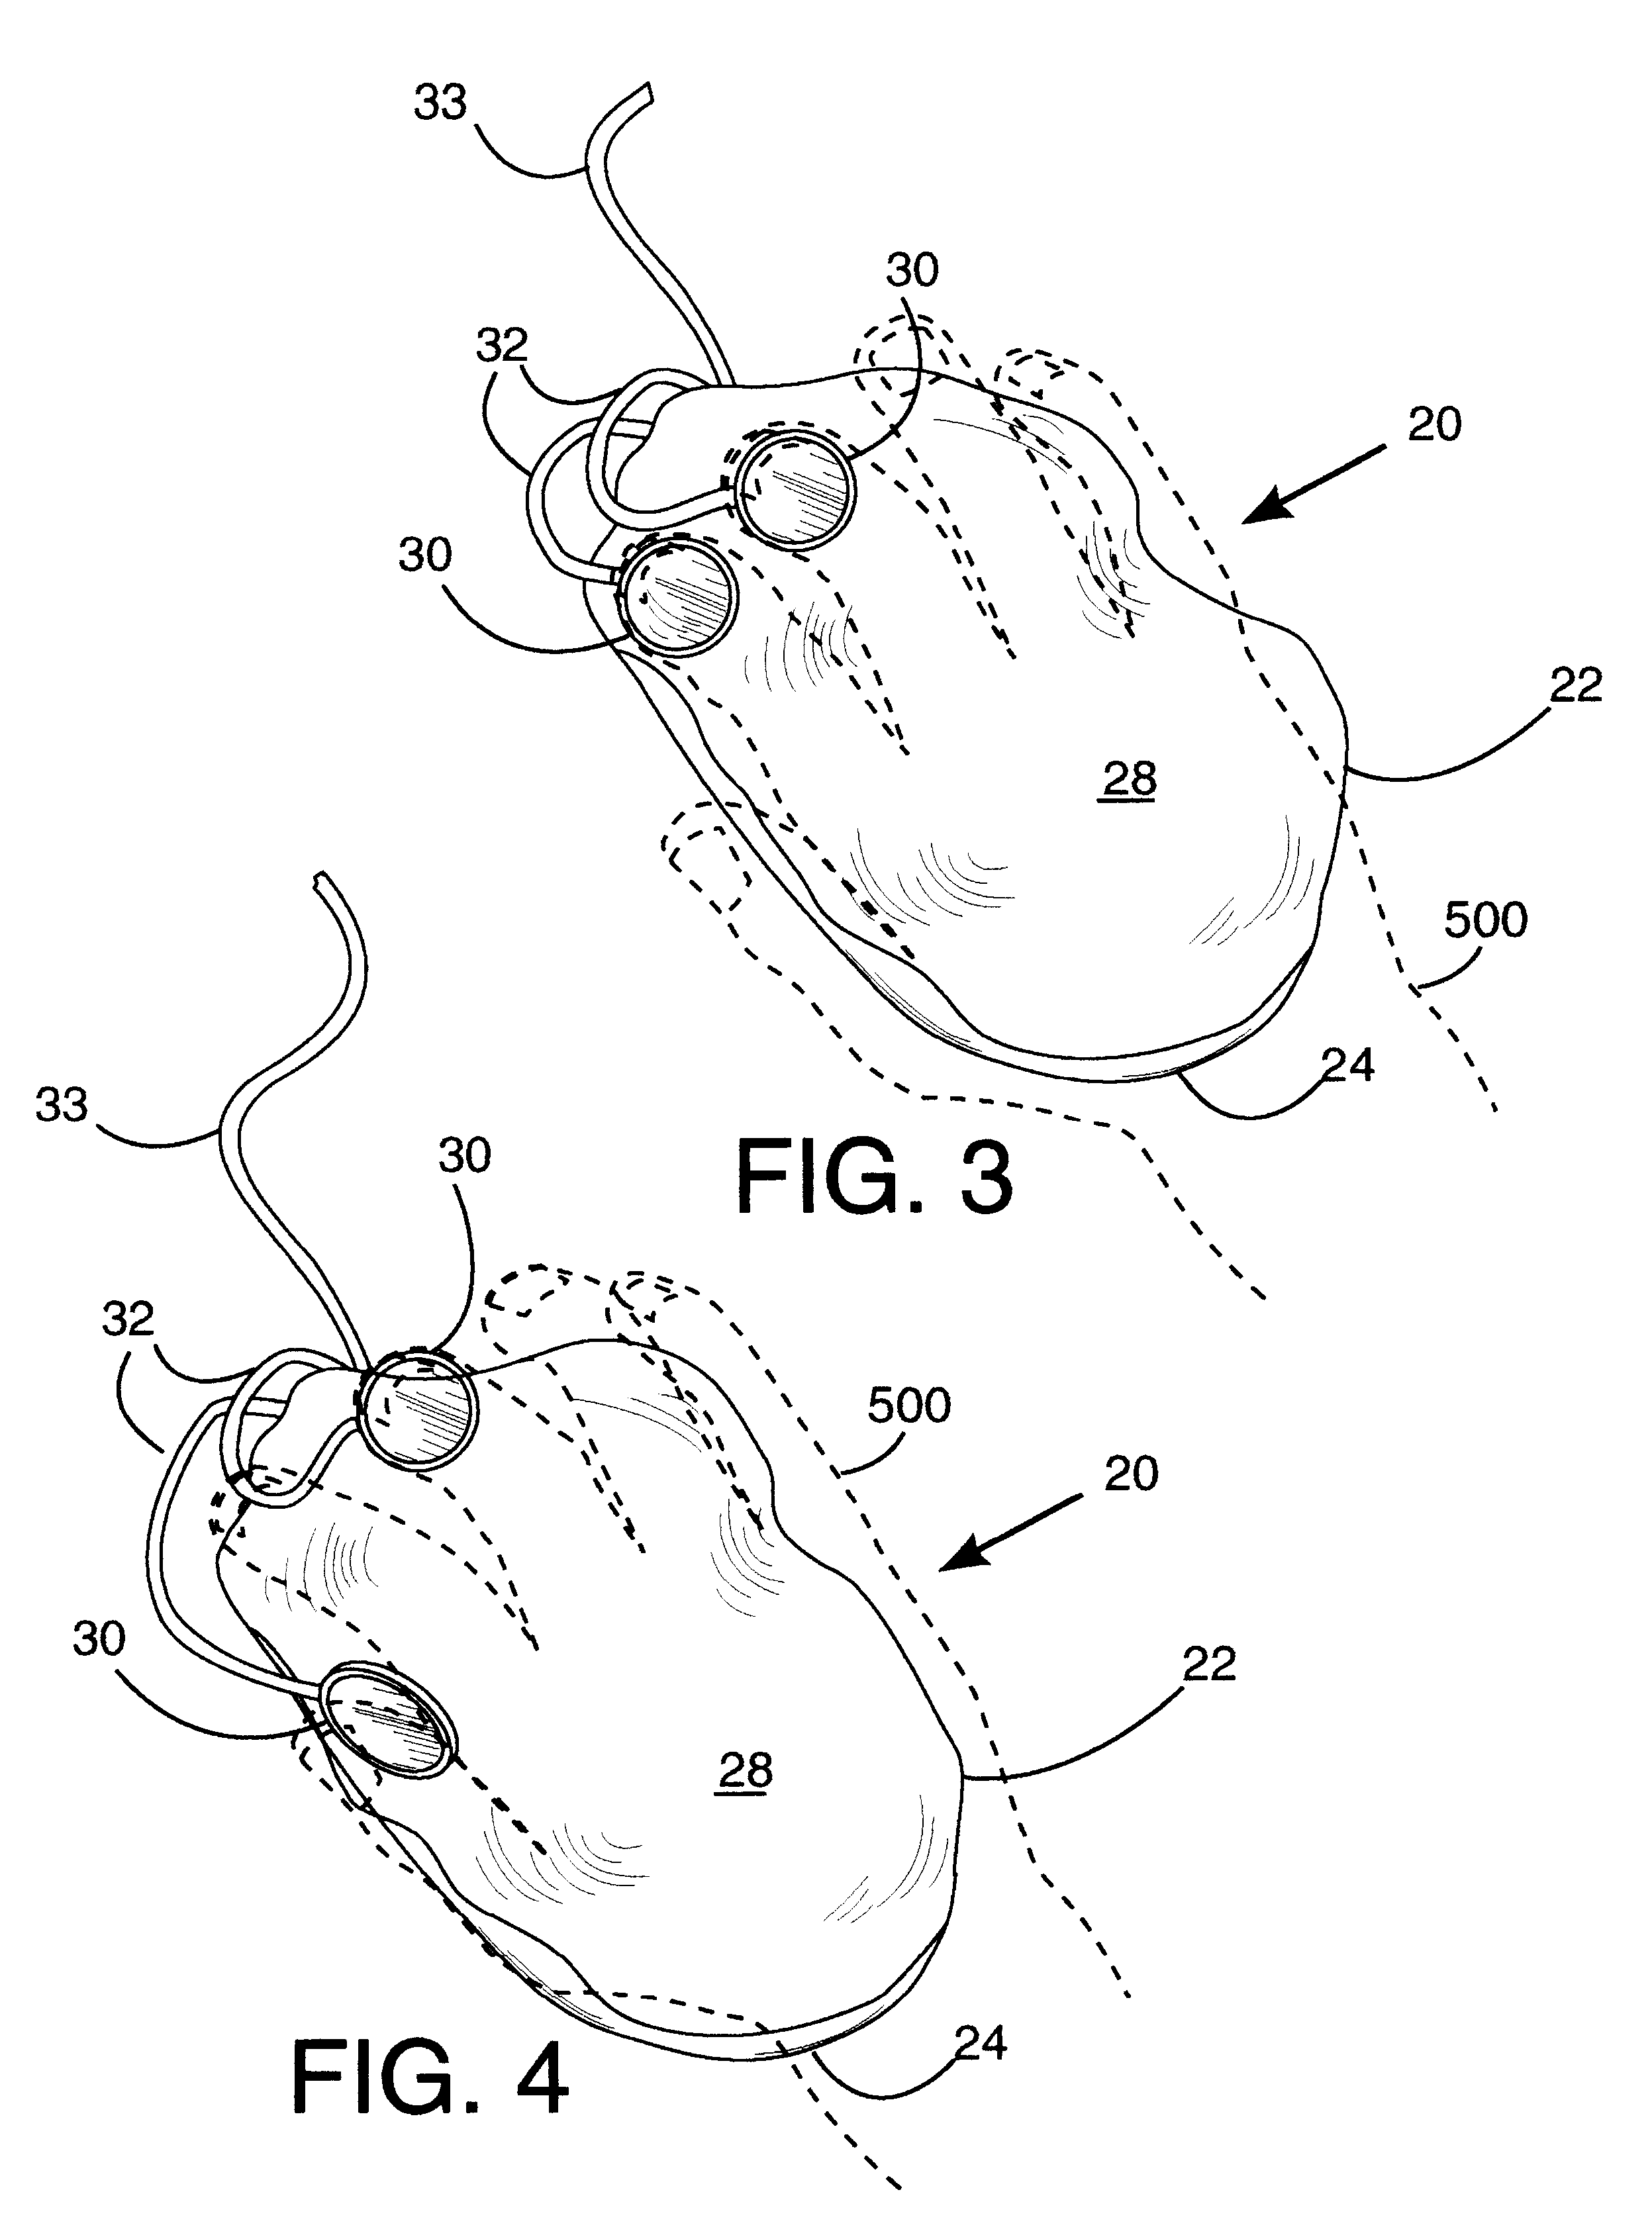 Computer pointing device and method of use